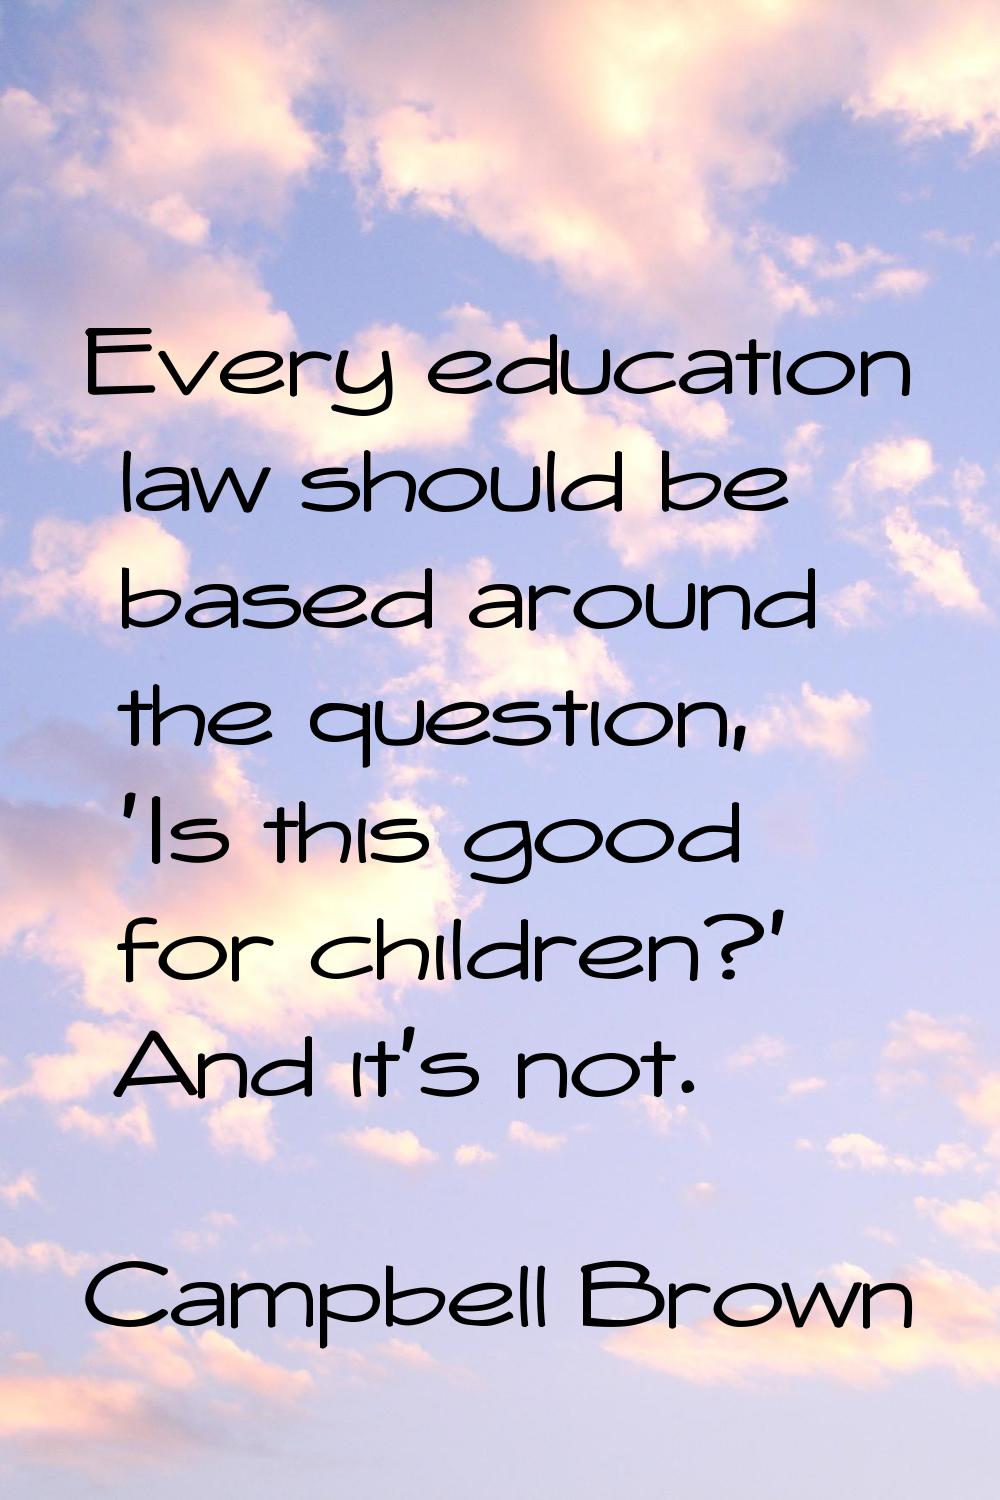 Every education law should be based around the question, 'Is this good for children?' And it's not.